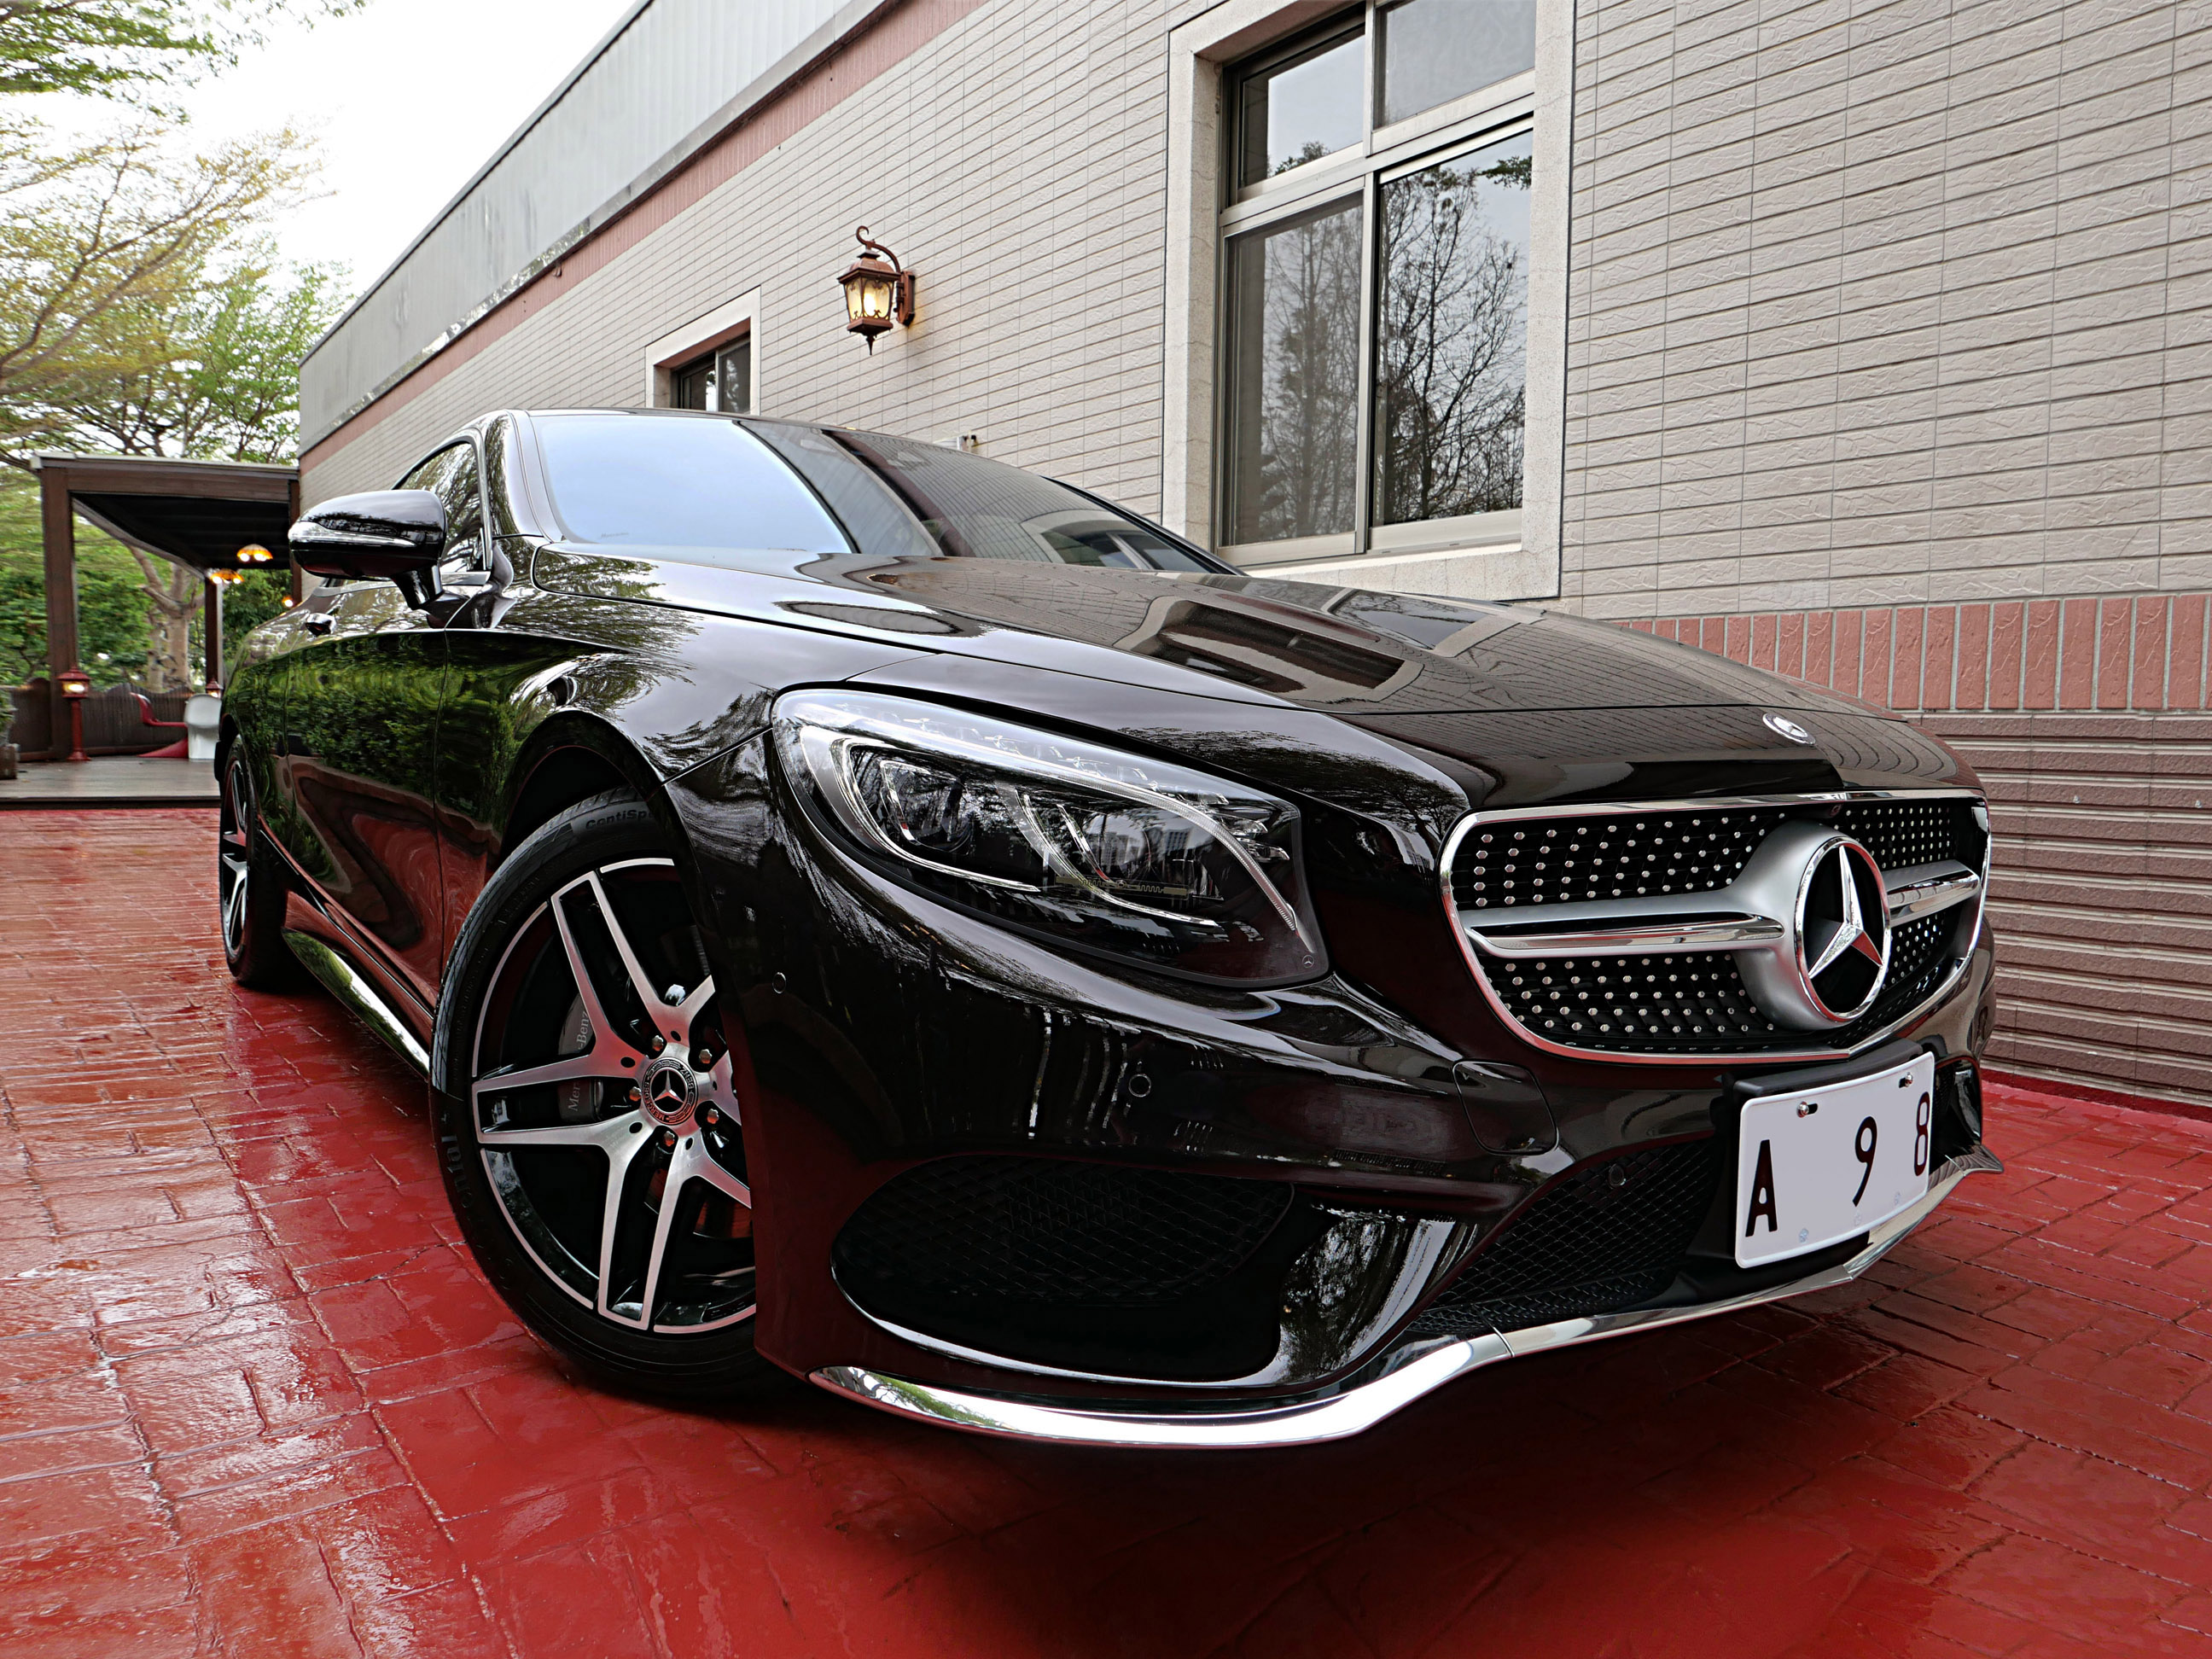 2016 M-Benz 賓士 S-class coupe